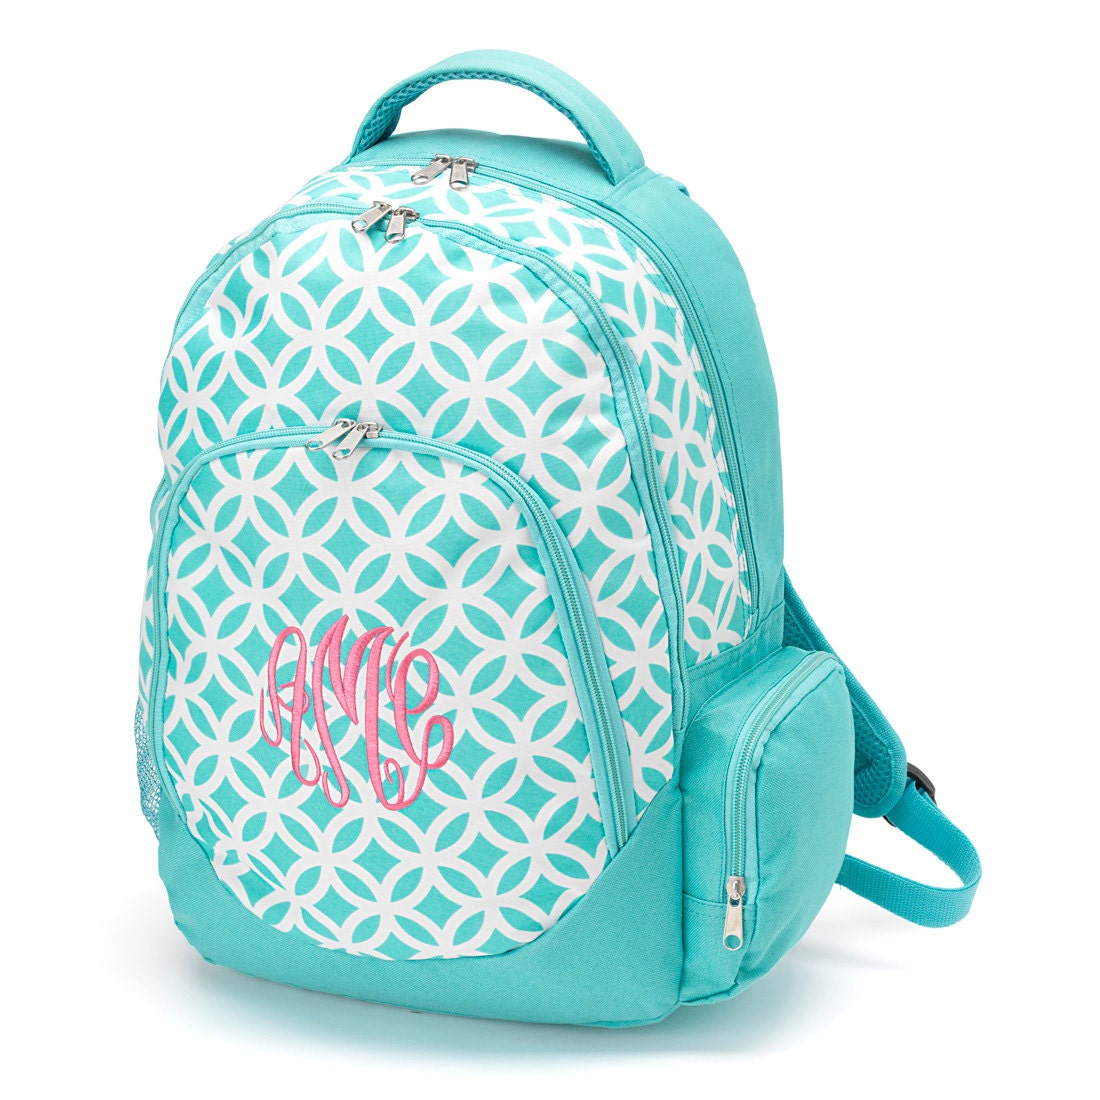 MONOGRAMMED BACKPACK and LUNCHBOX by SassyPantsEmbroidery on Etsy